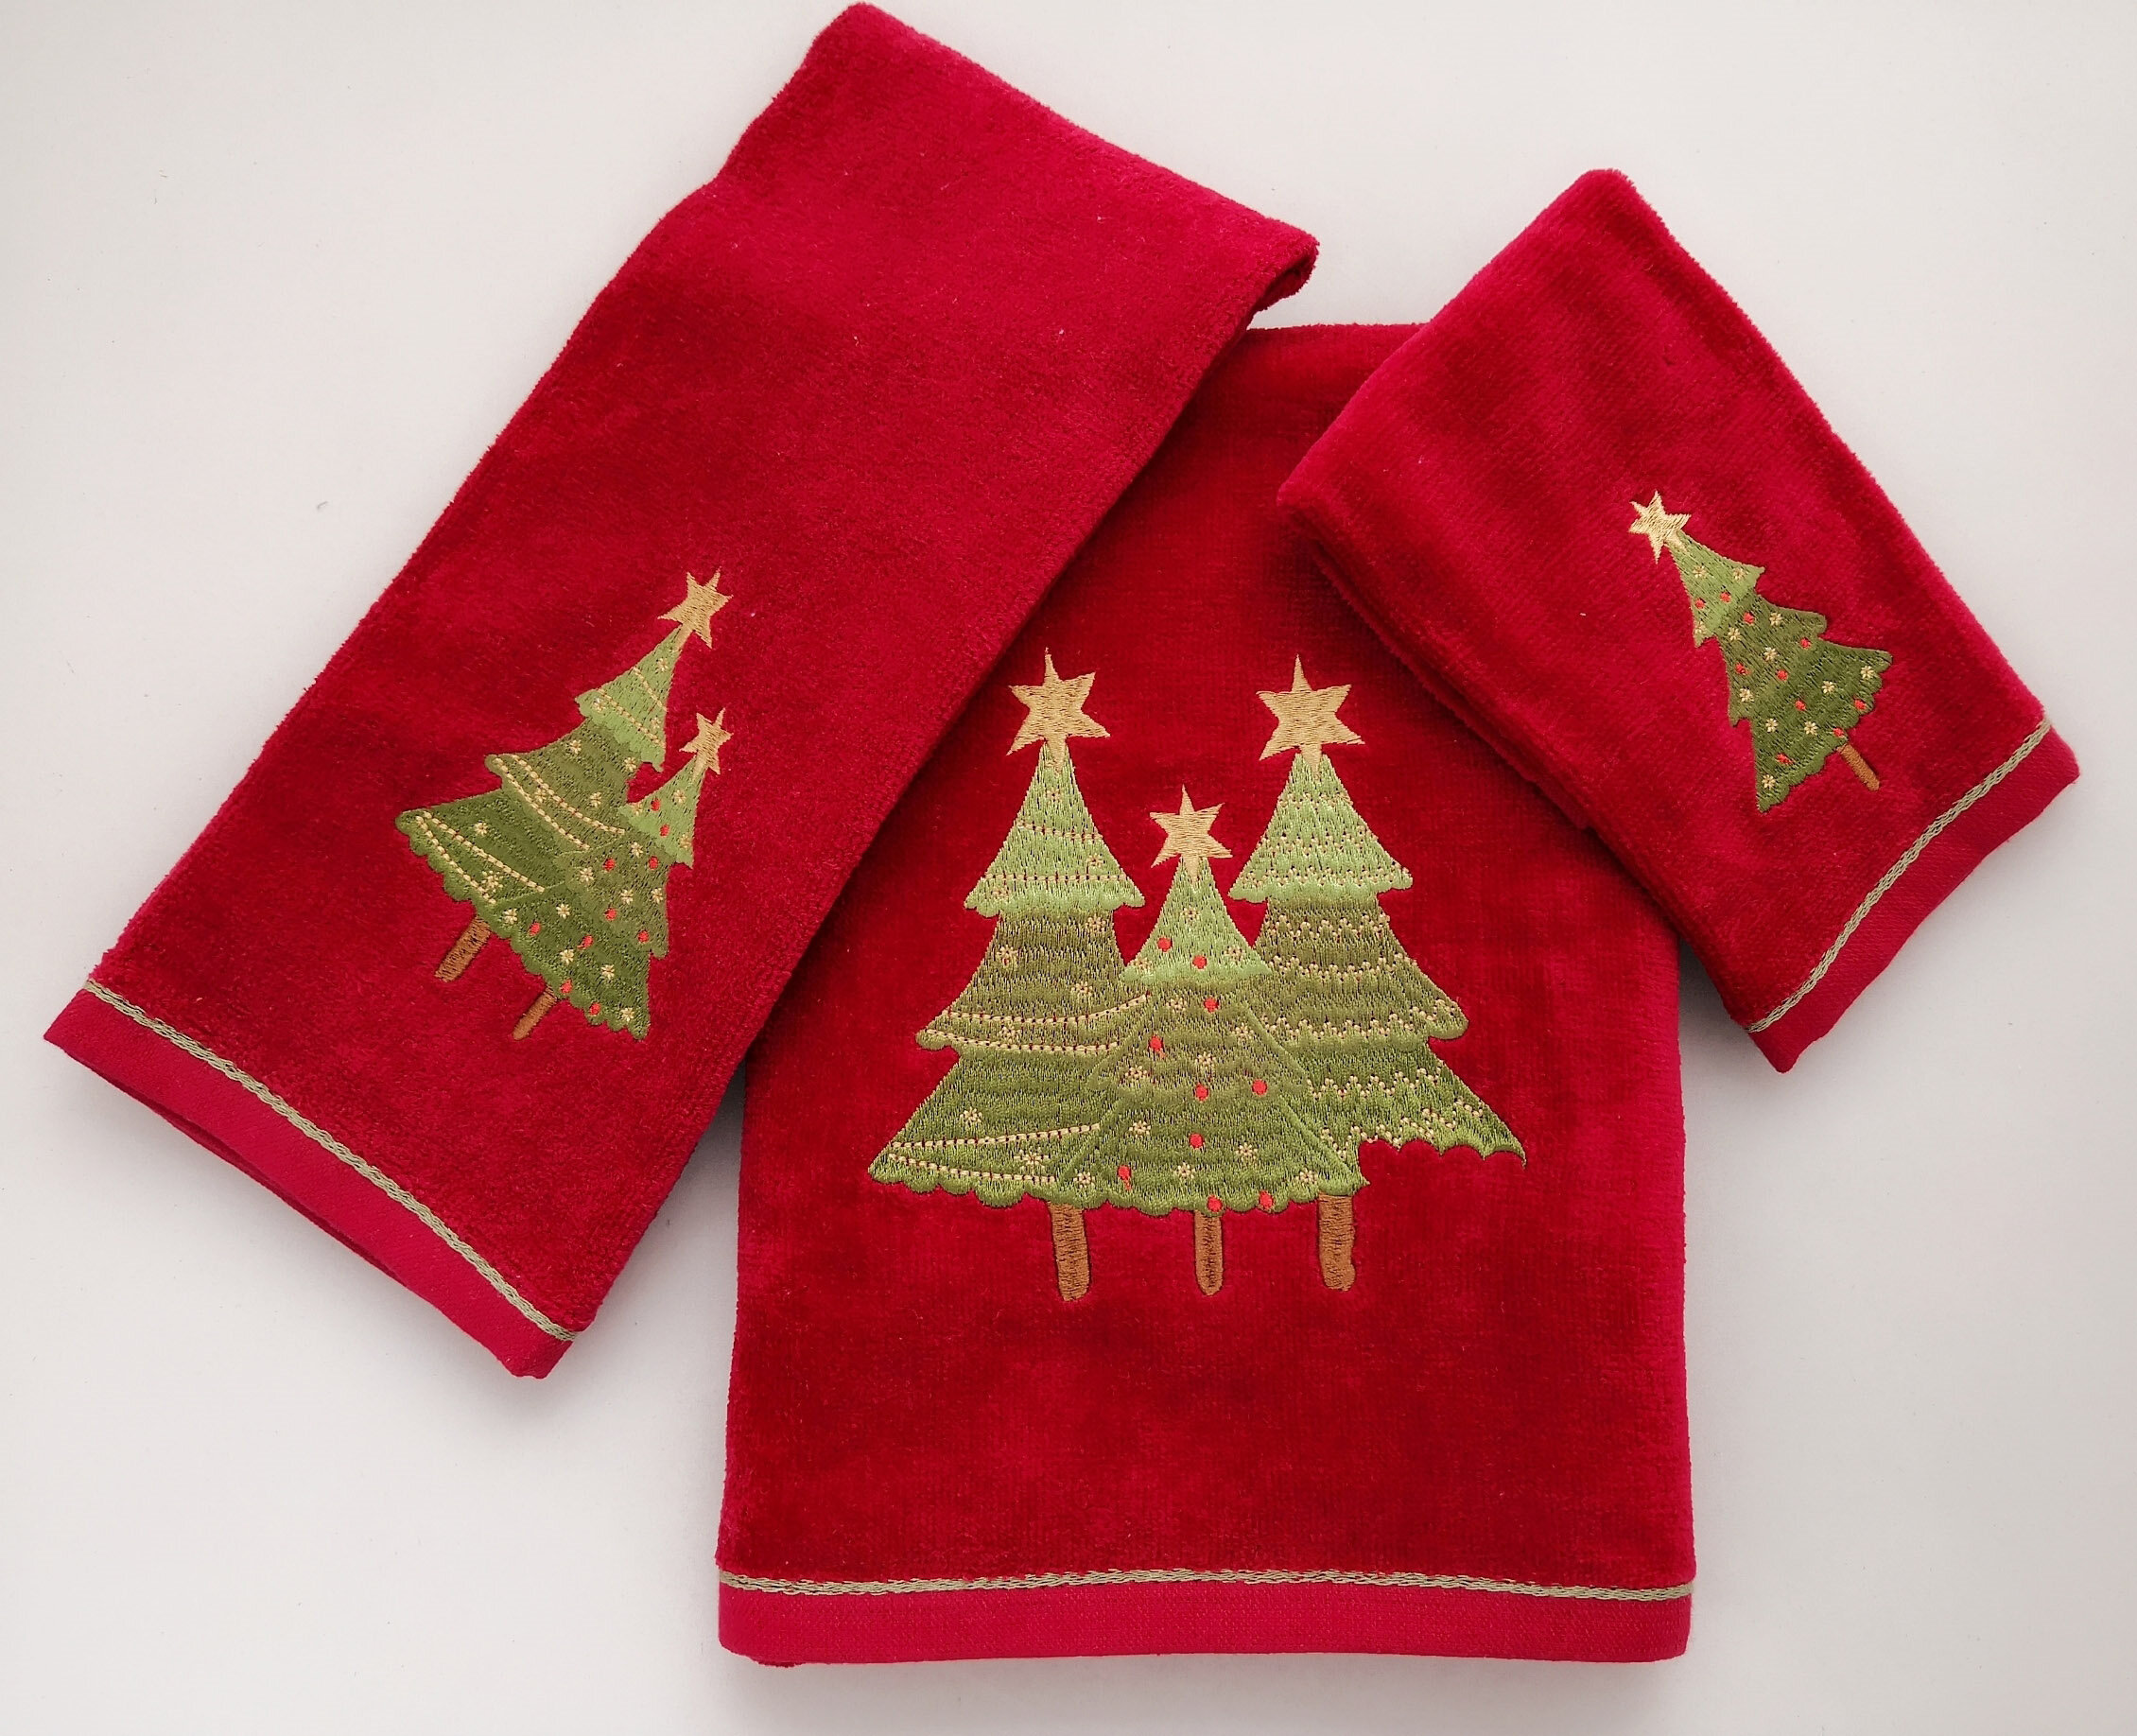 The Holiday Aisle® 100% Cotton Bath Towels & Reviews